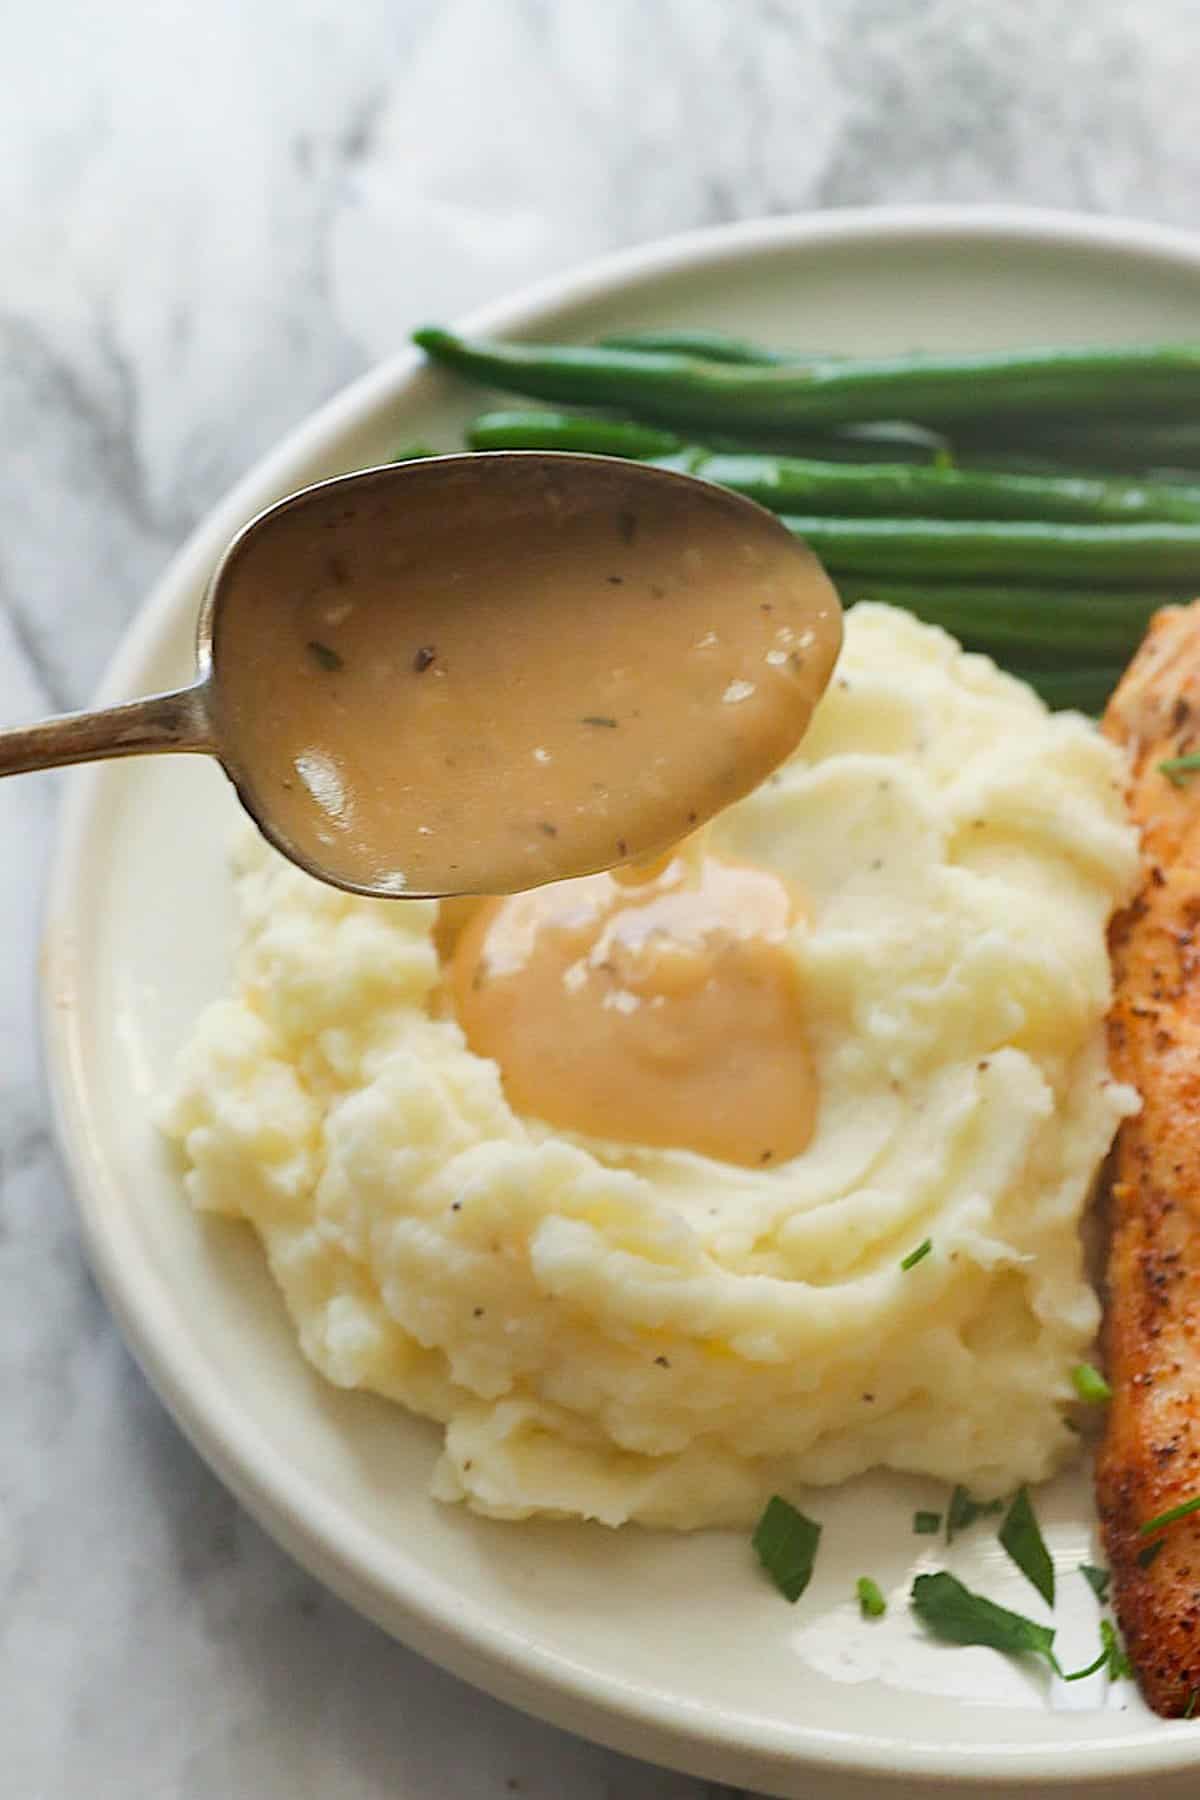 Drizzling comforting gravy over mashed potatoes